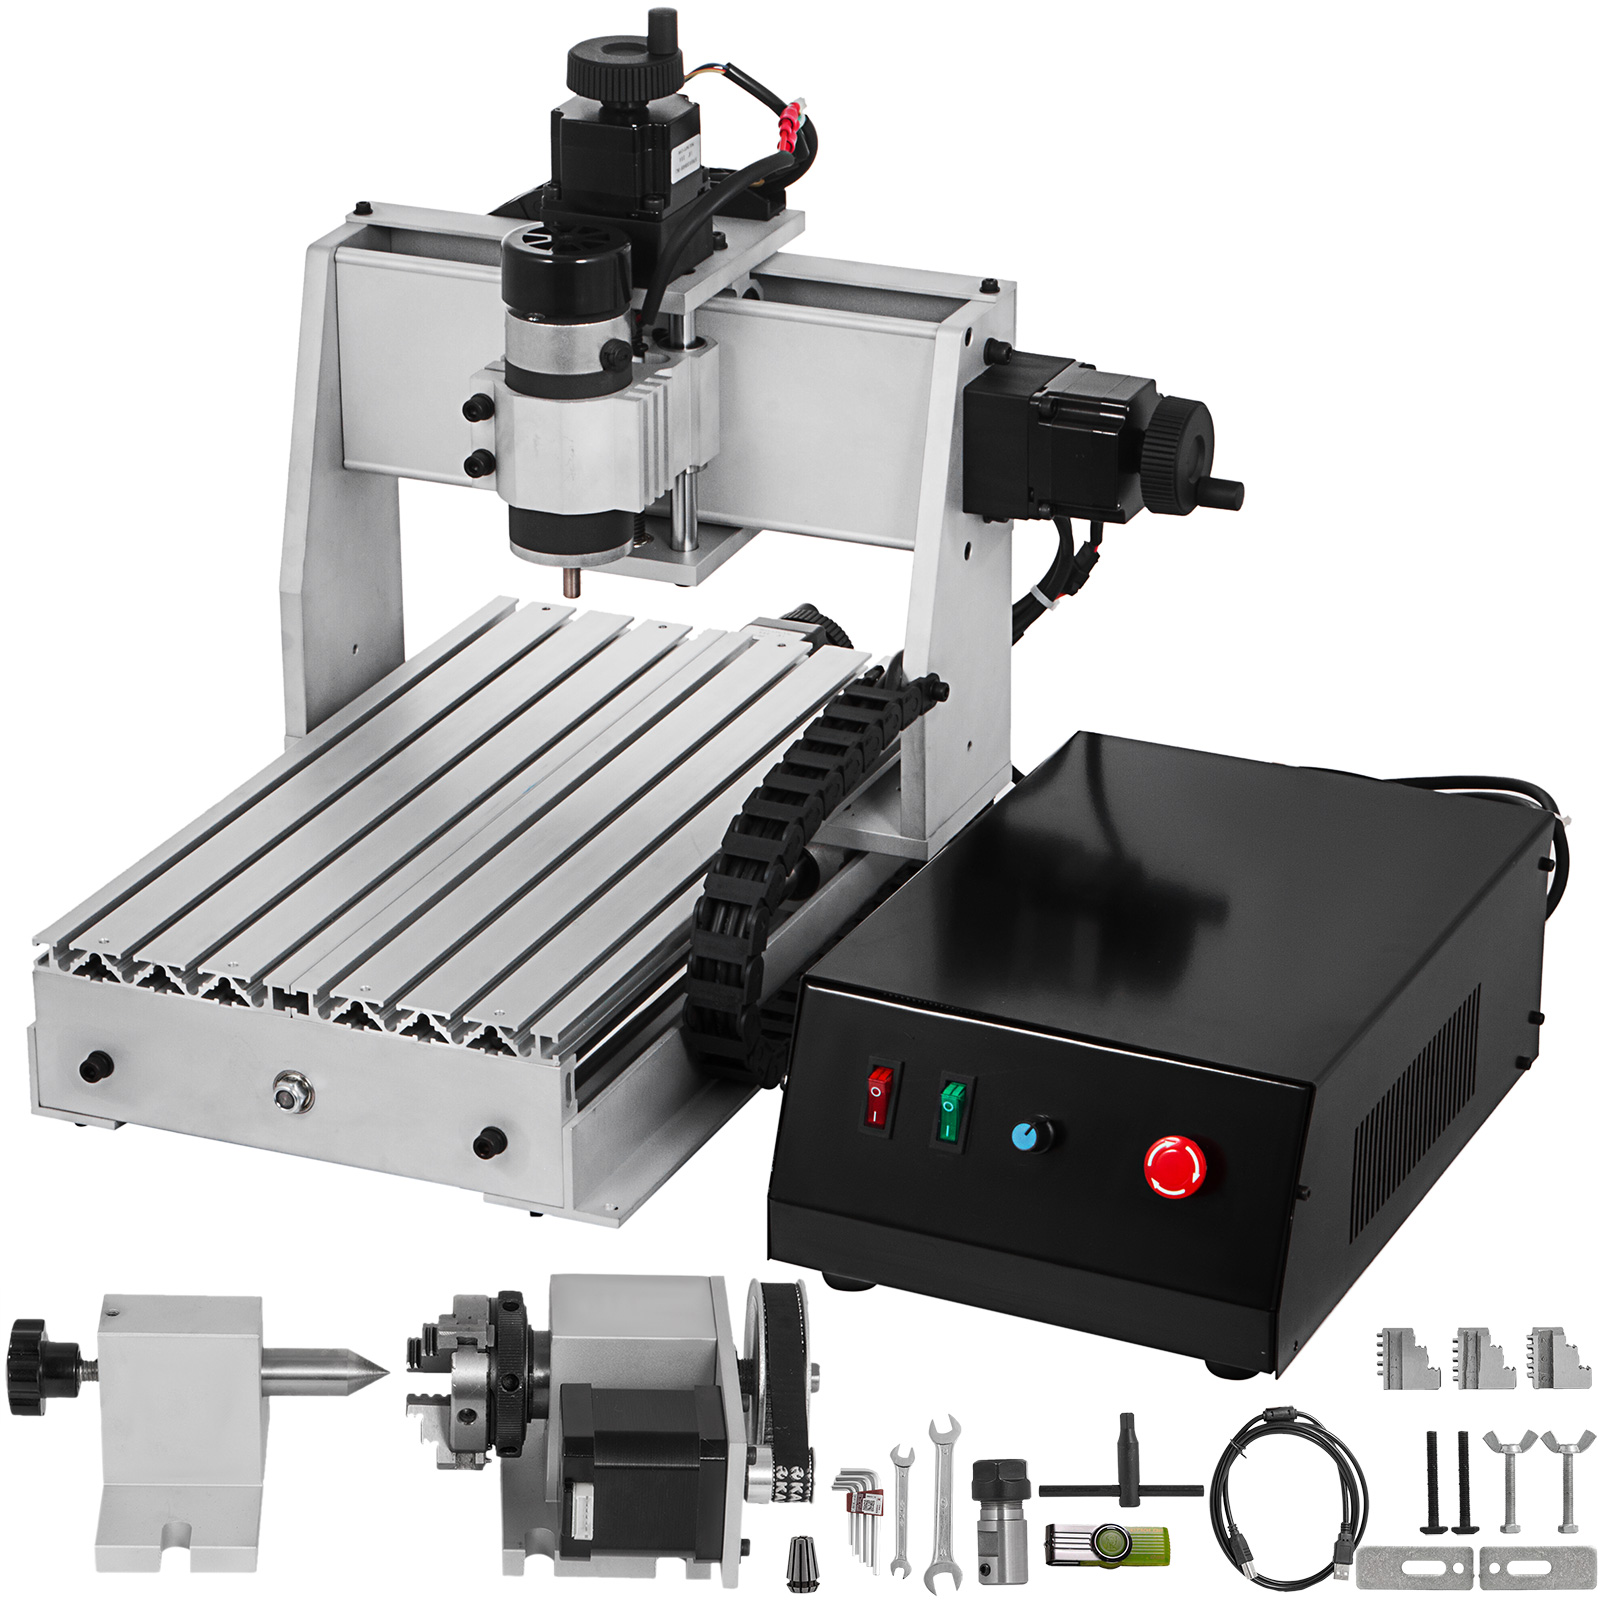 4 axis CNC controller Stand Alone USB Spindle  milling drilling engraving router 